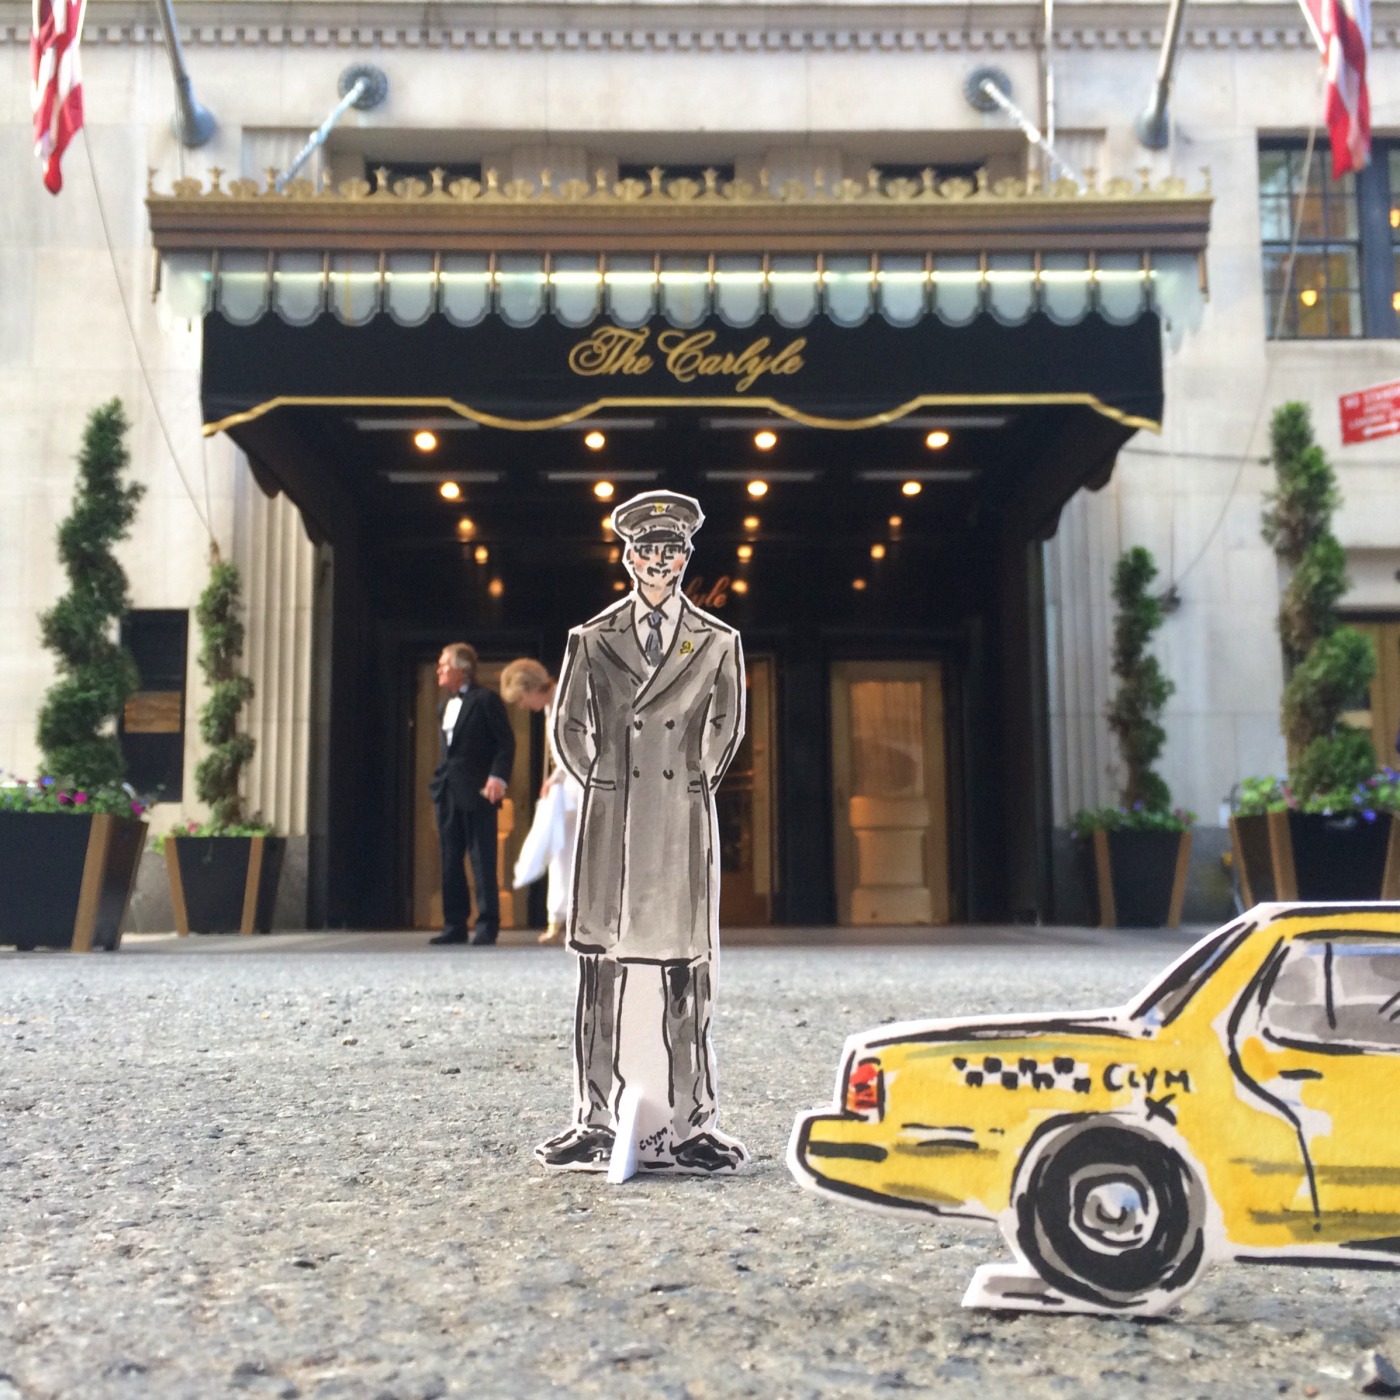 THE CARLYLE DOORMAN